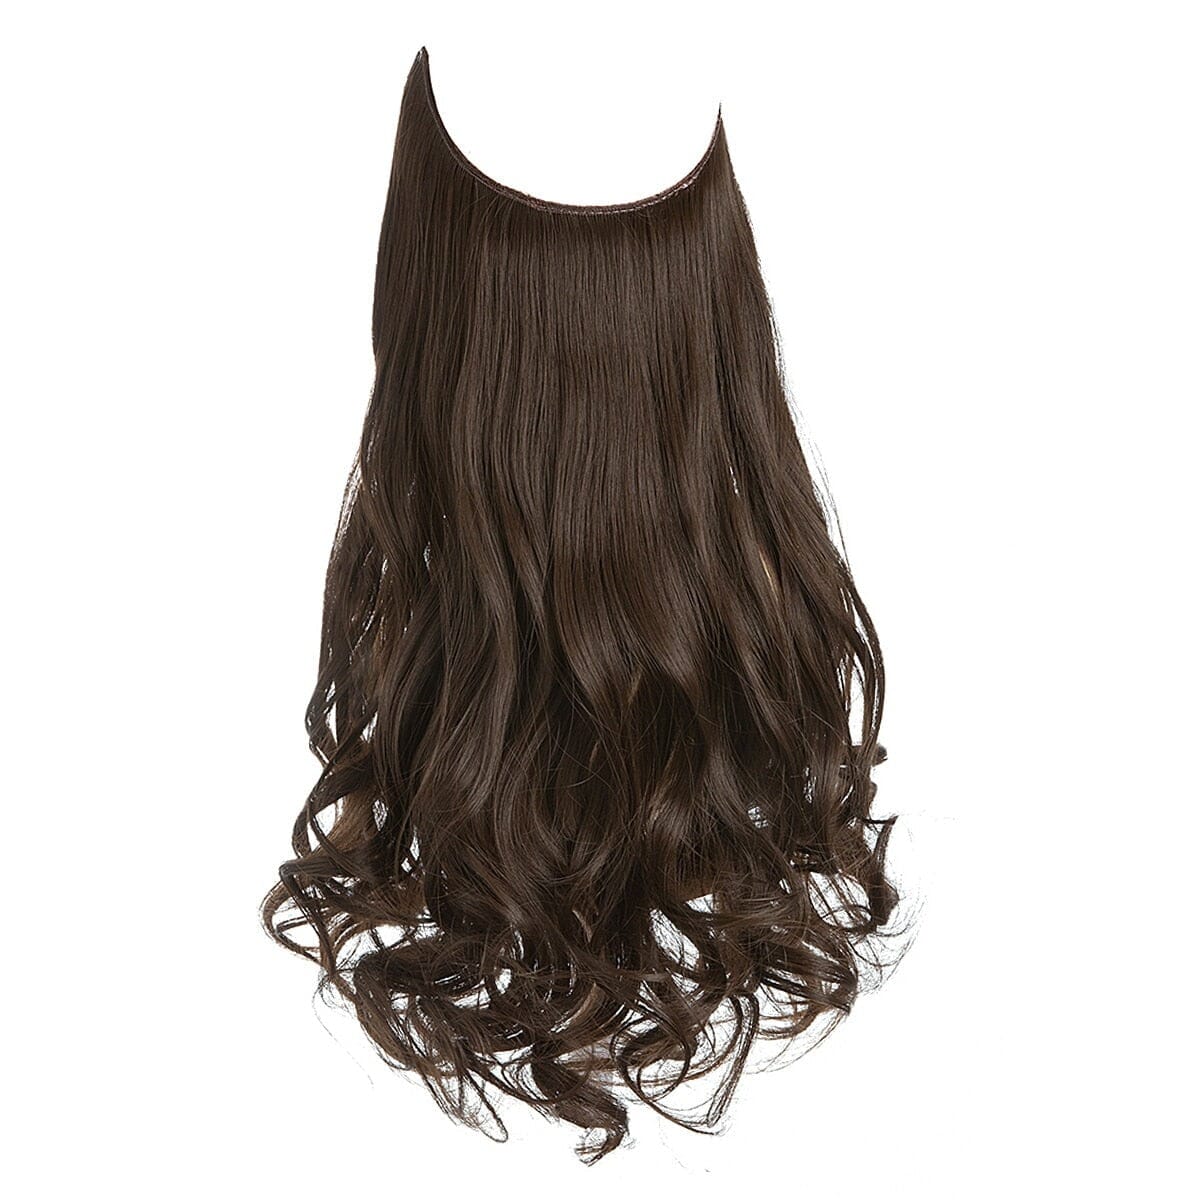 ExtensionWin™ I Hair Extension for Women 